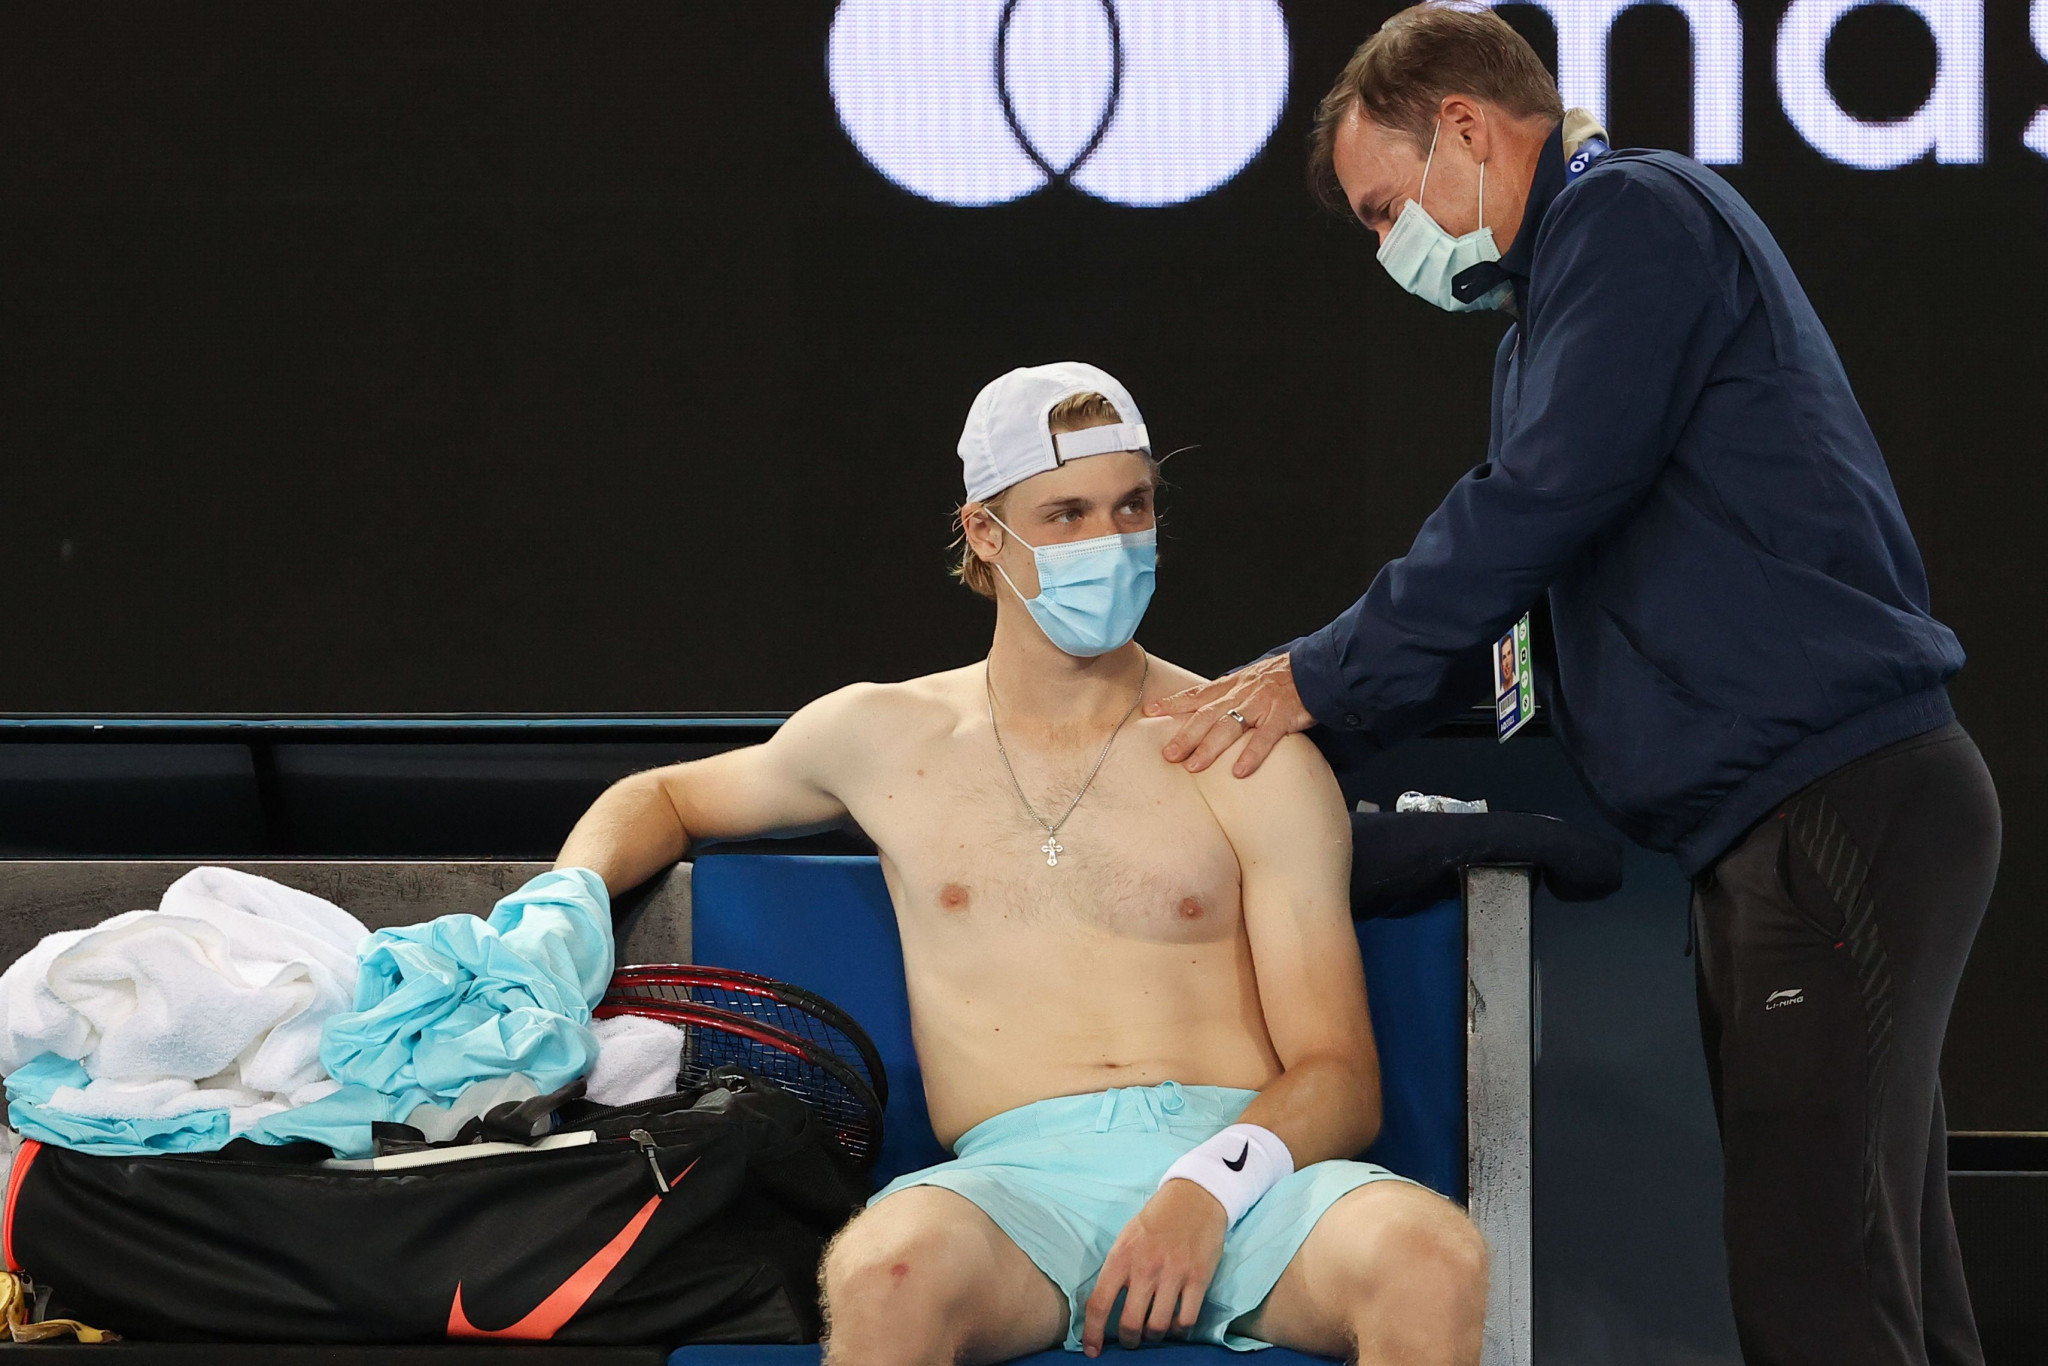 Canada's Denis Shapovalov removes his top during a medical time-out ©Getty Images